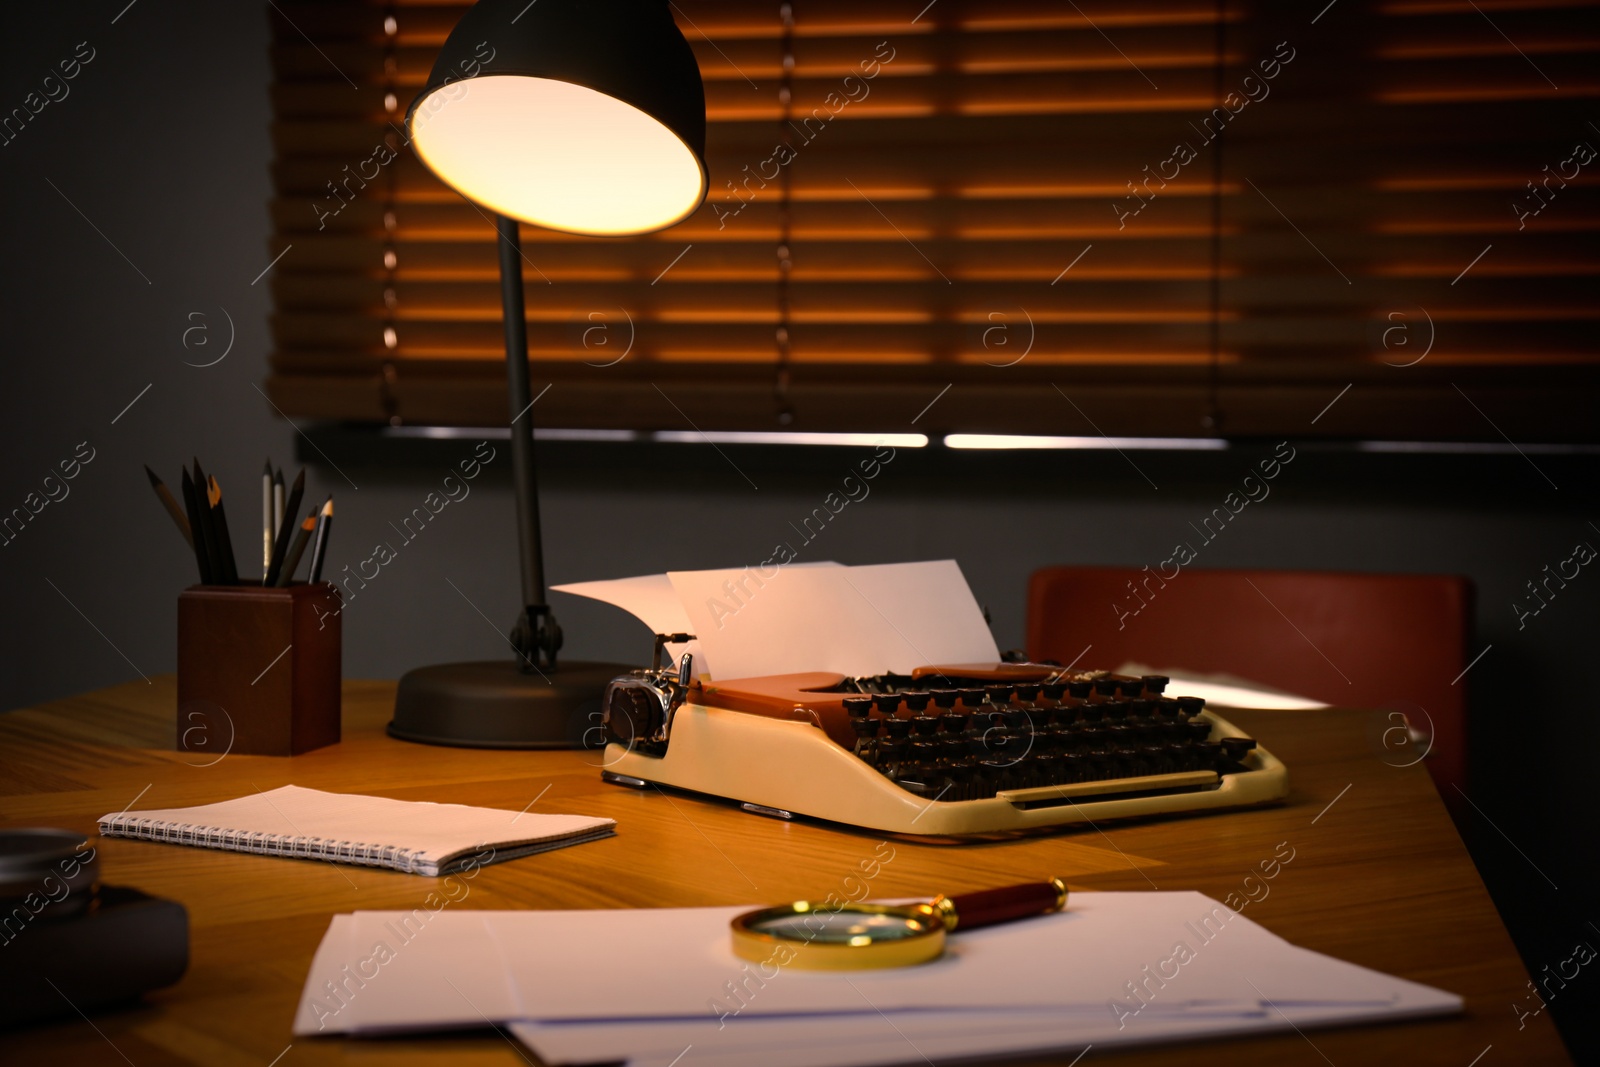 Photo of Typewriter, magnifying glass and papers on desk in office. Detective's workplace